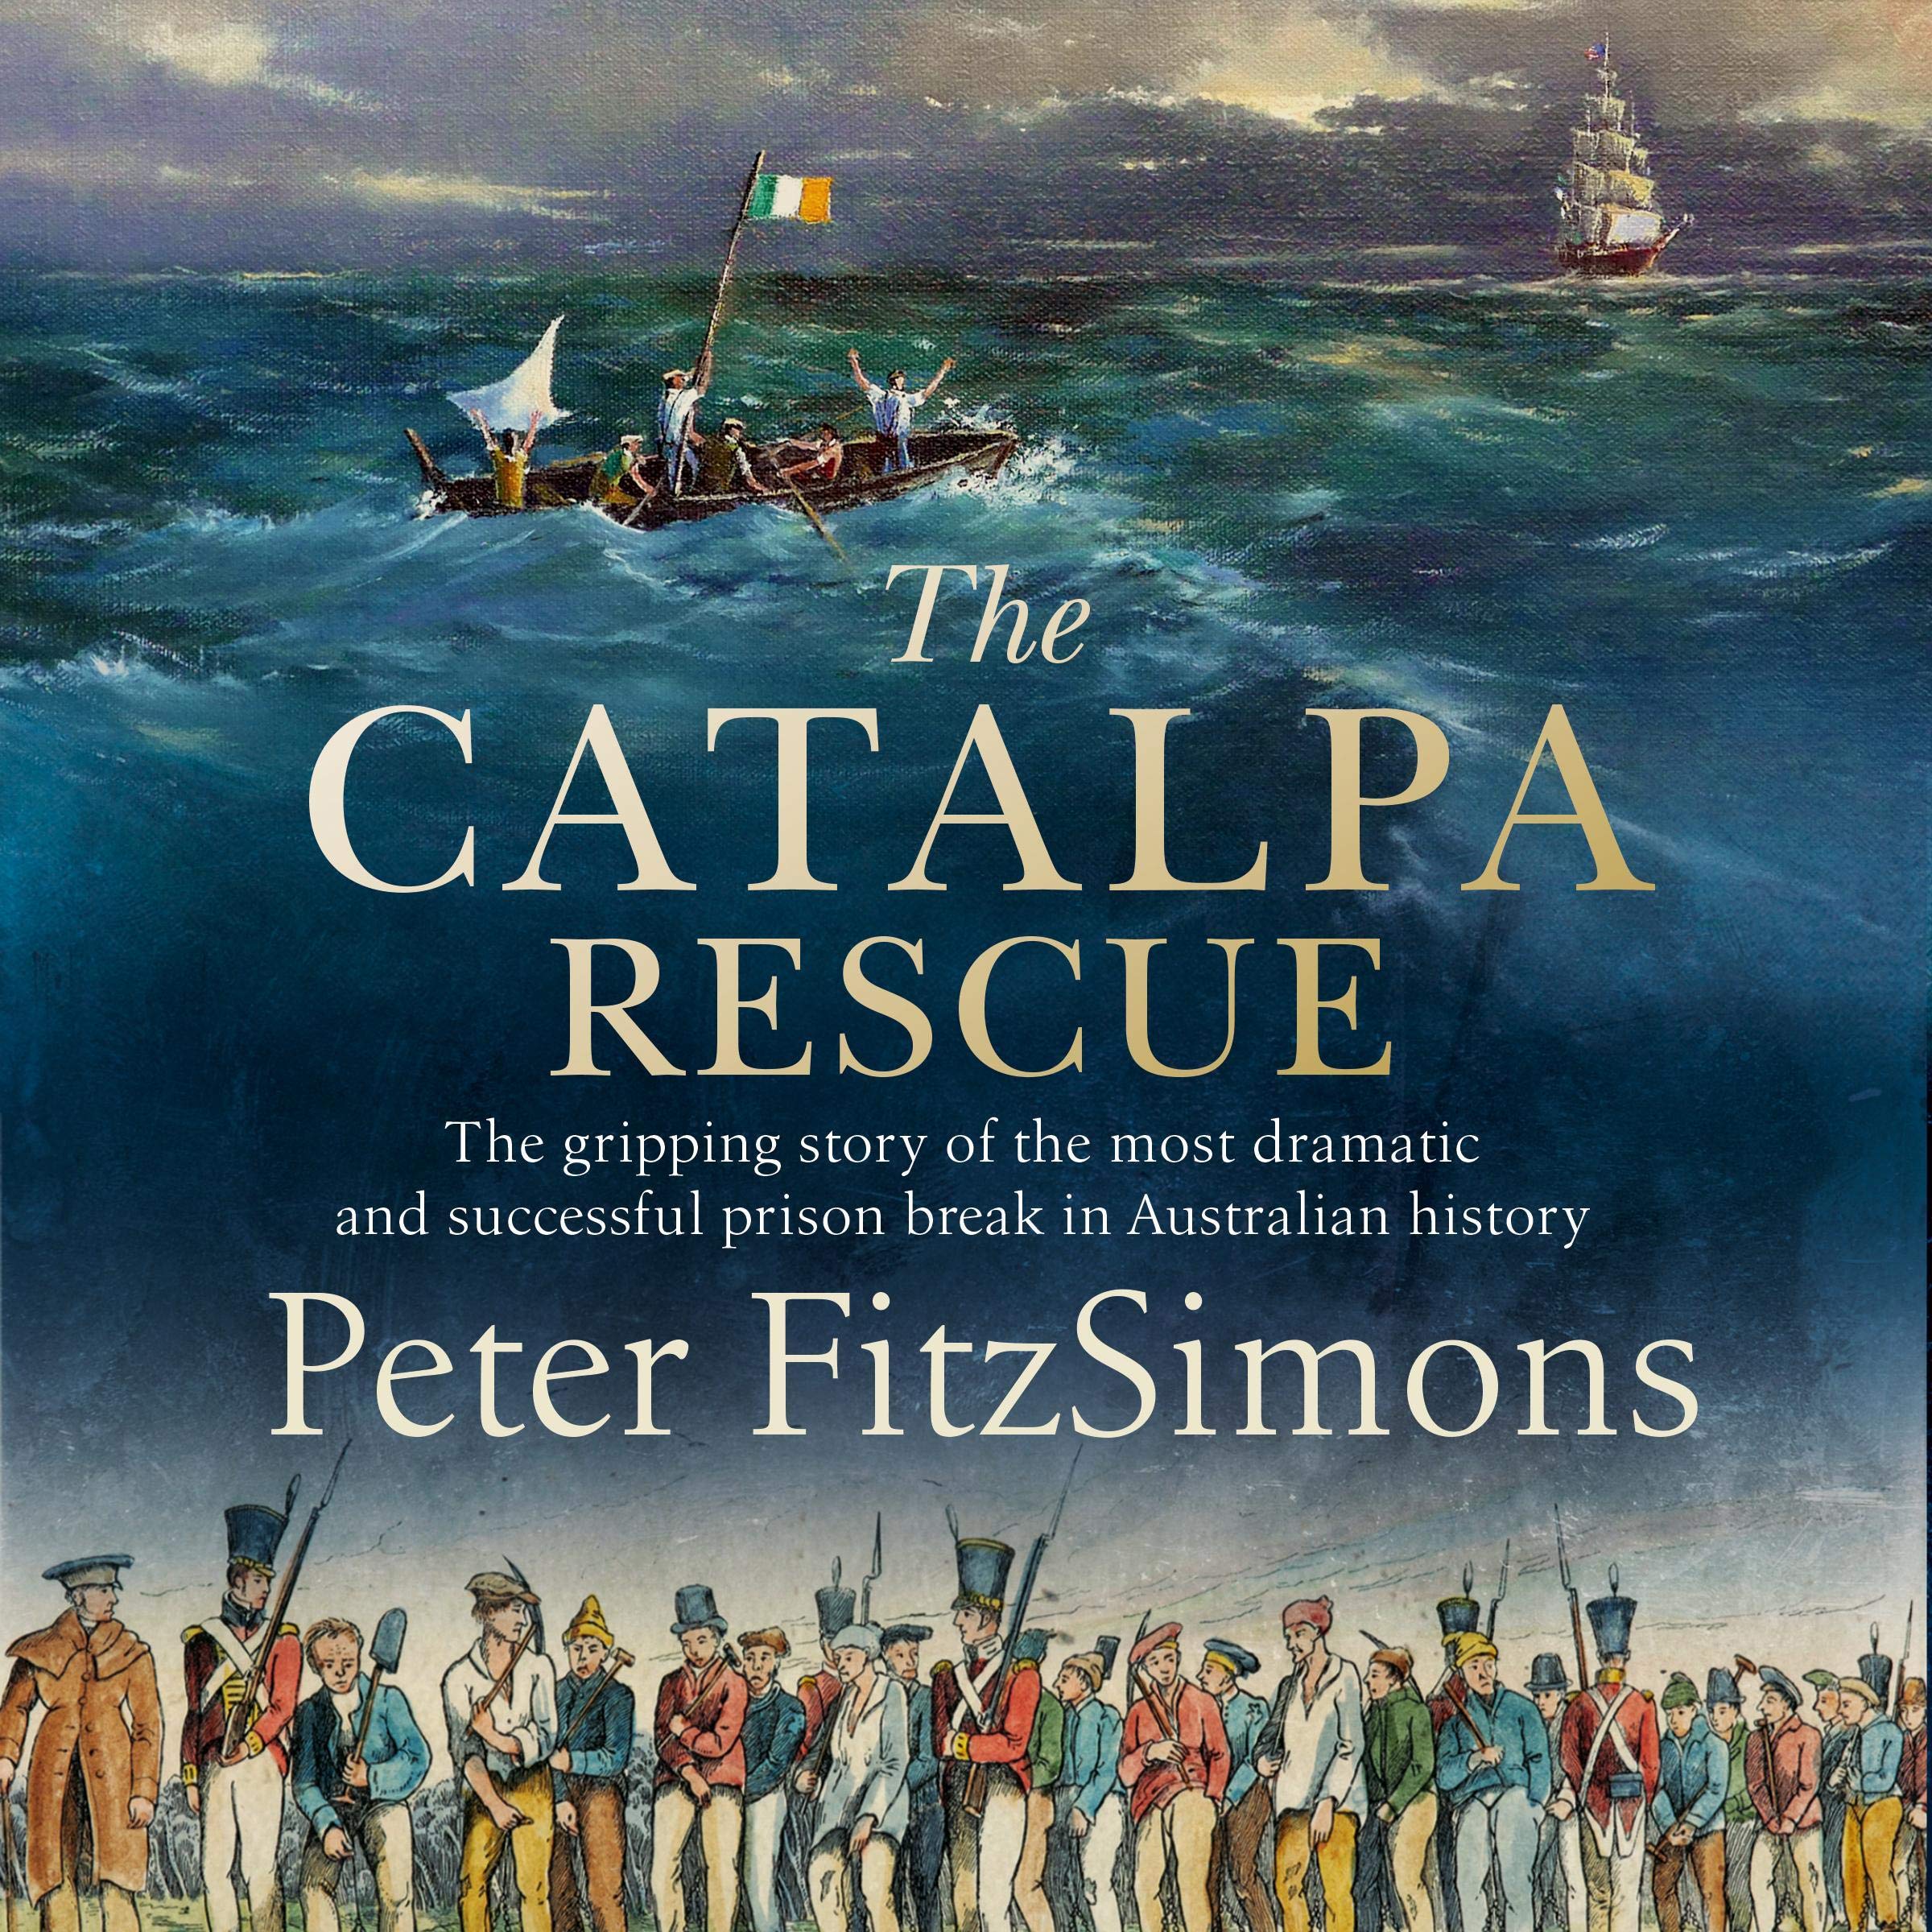 The Catalpa Rescue: The Gripping Story of the Most Dramatic and Successful Prison Break in Australian History